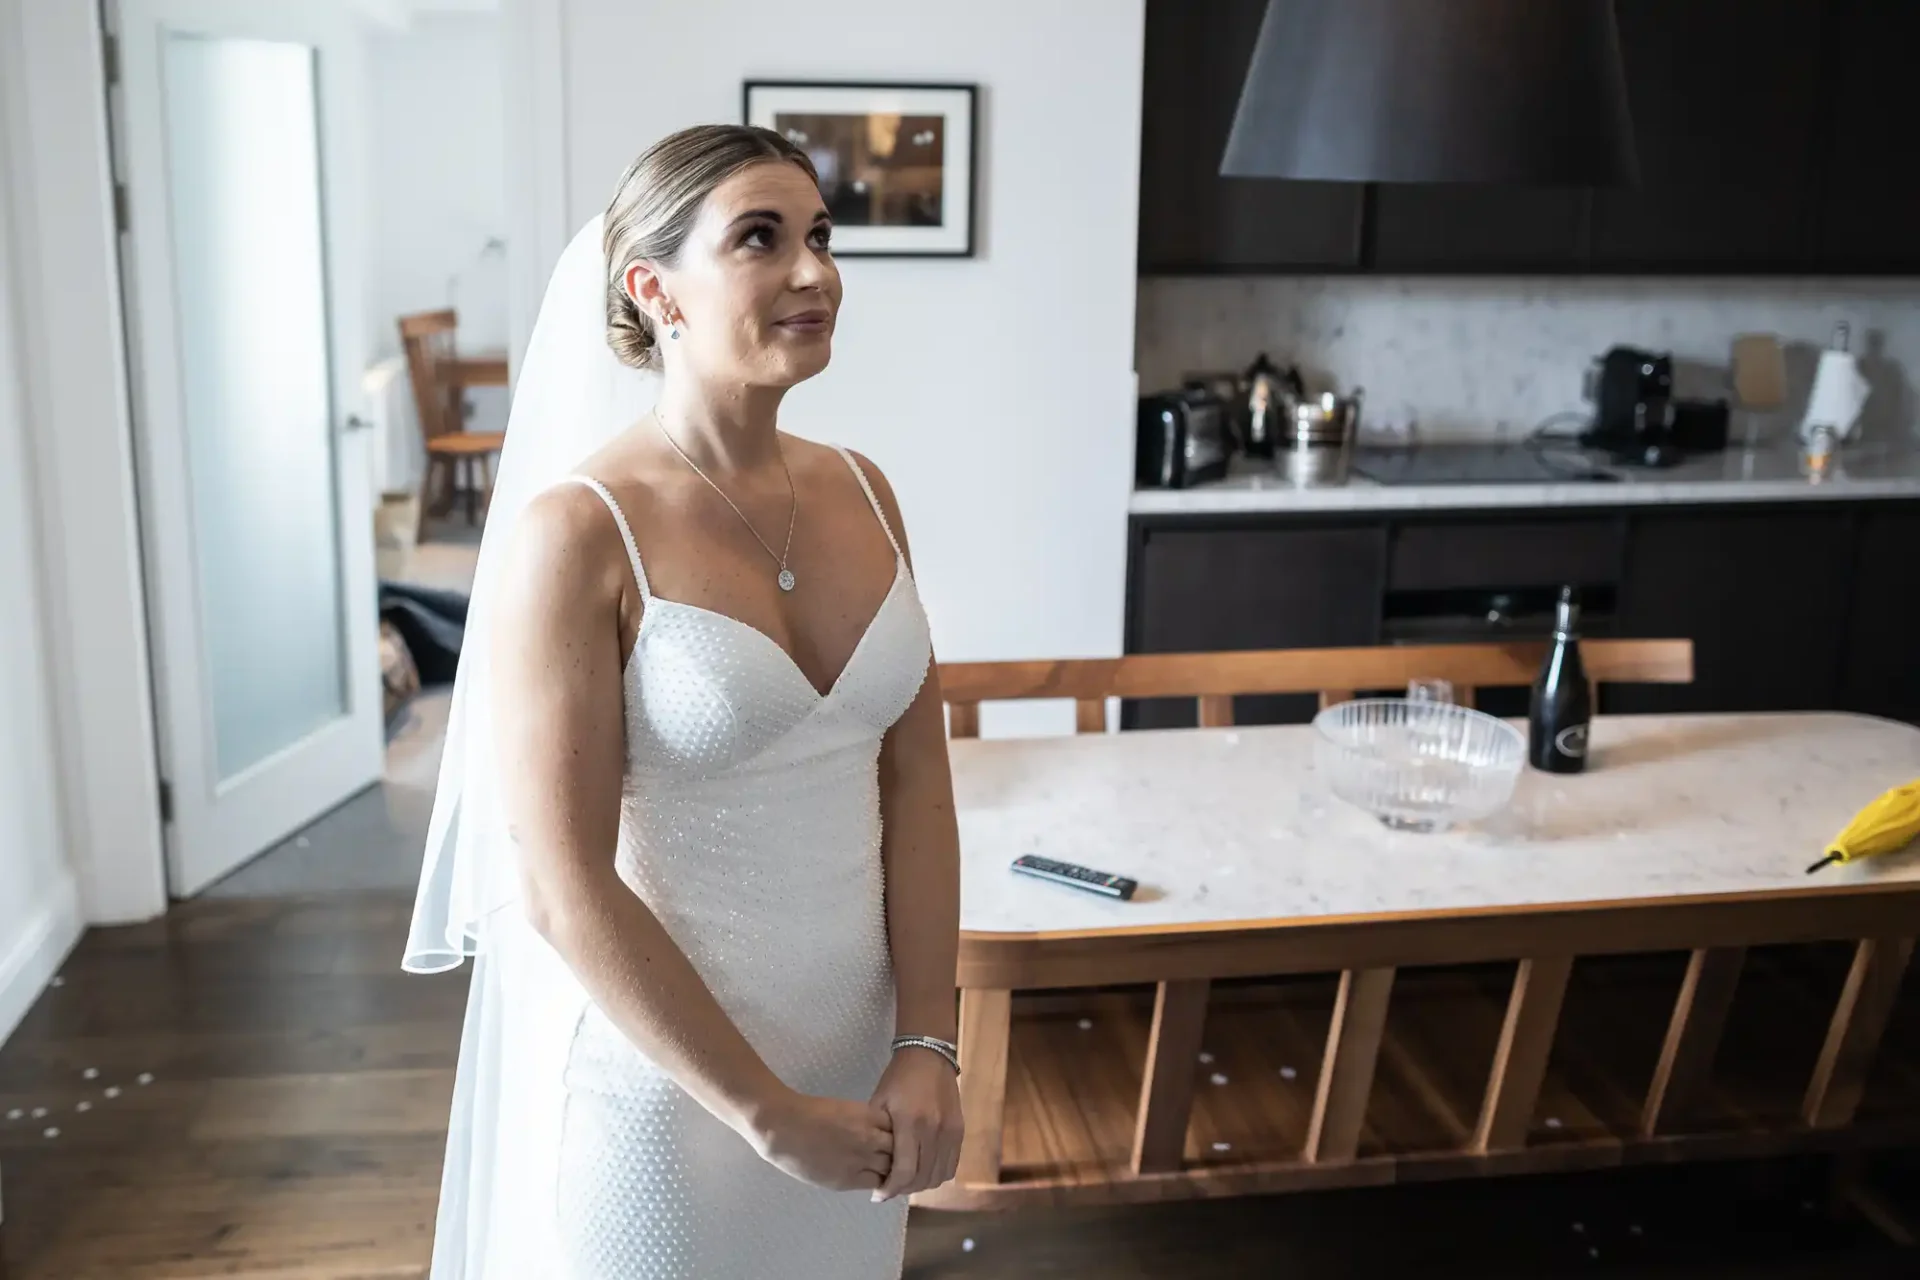 A bride in a white dress stands pensively in a modern kitchen, looking to the side.